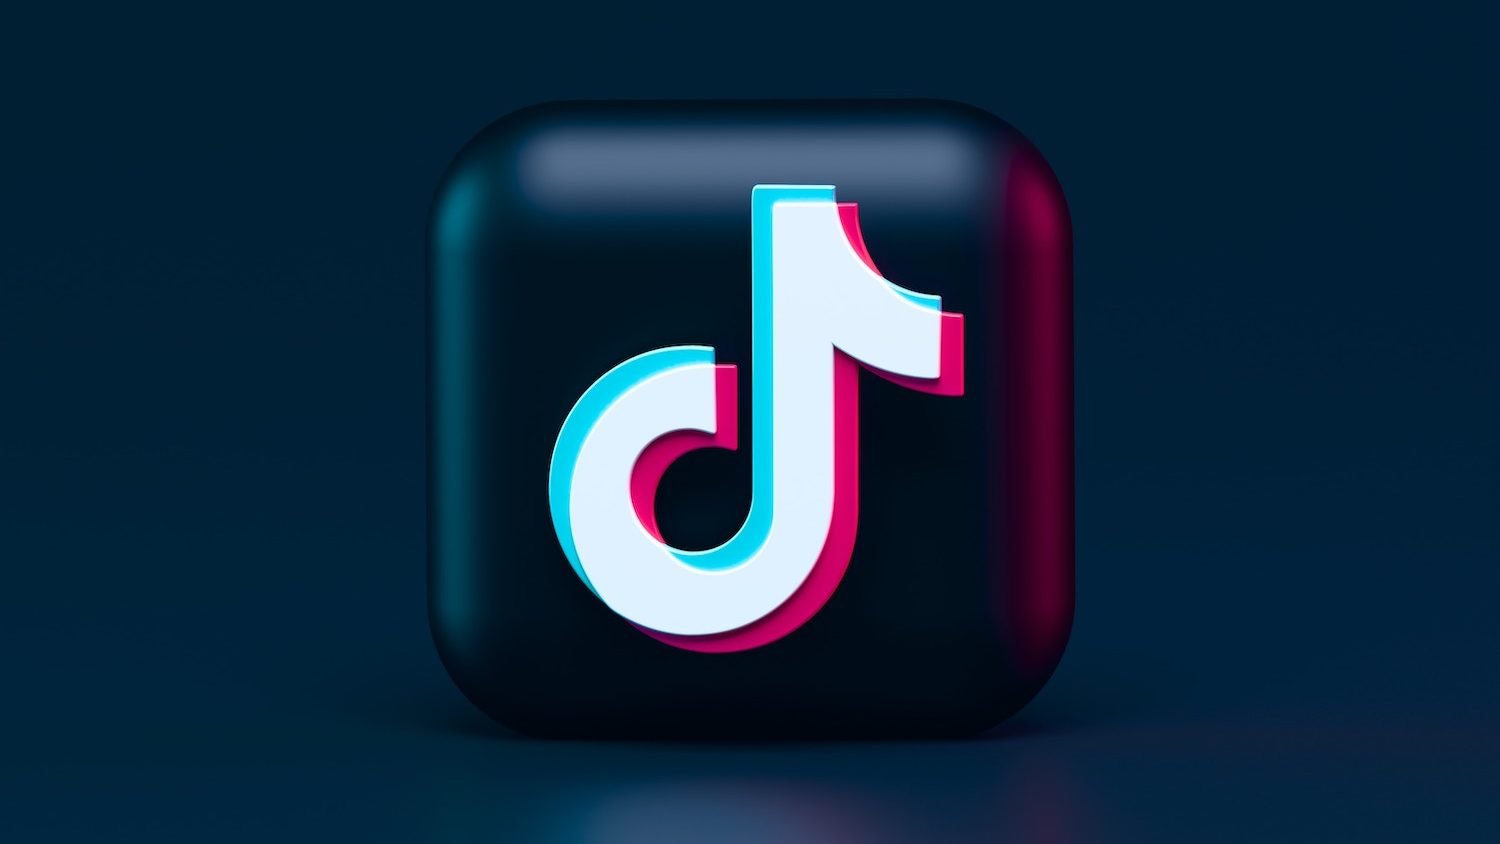 On a black squircle, there is a 3D logo design illustration of the social media application TikTok.